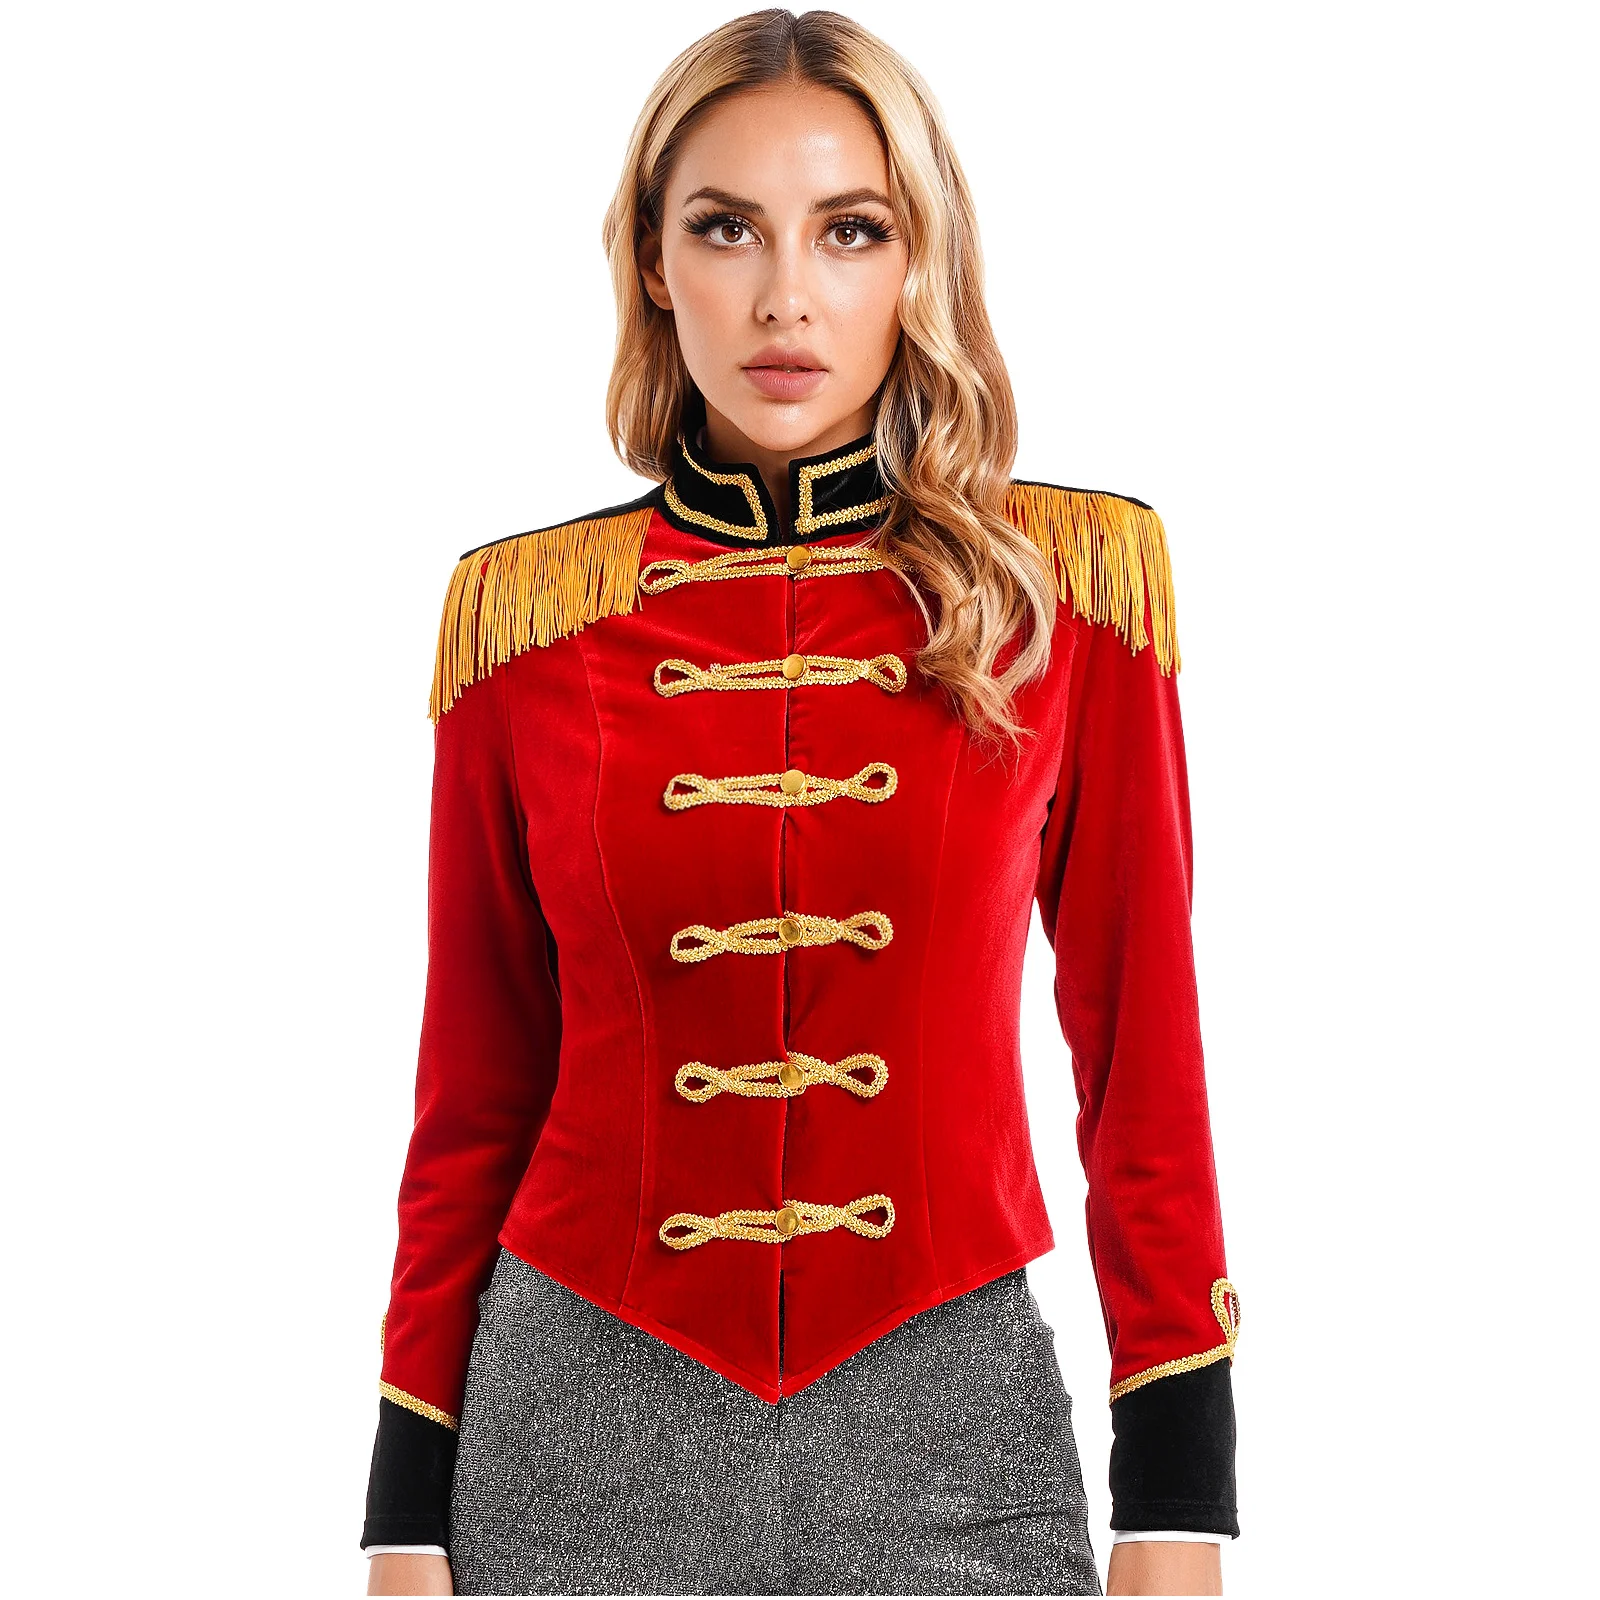 Womens Circus Ringmaster Costume Stand Collar Fringed Shoulder Board Velvet Jacket Coat Halloween Carnival Party Cosplay Costume invincible mark grayson cosplay costume halloween carnival suit